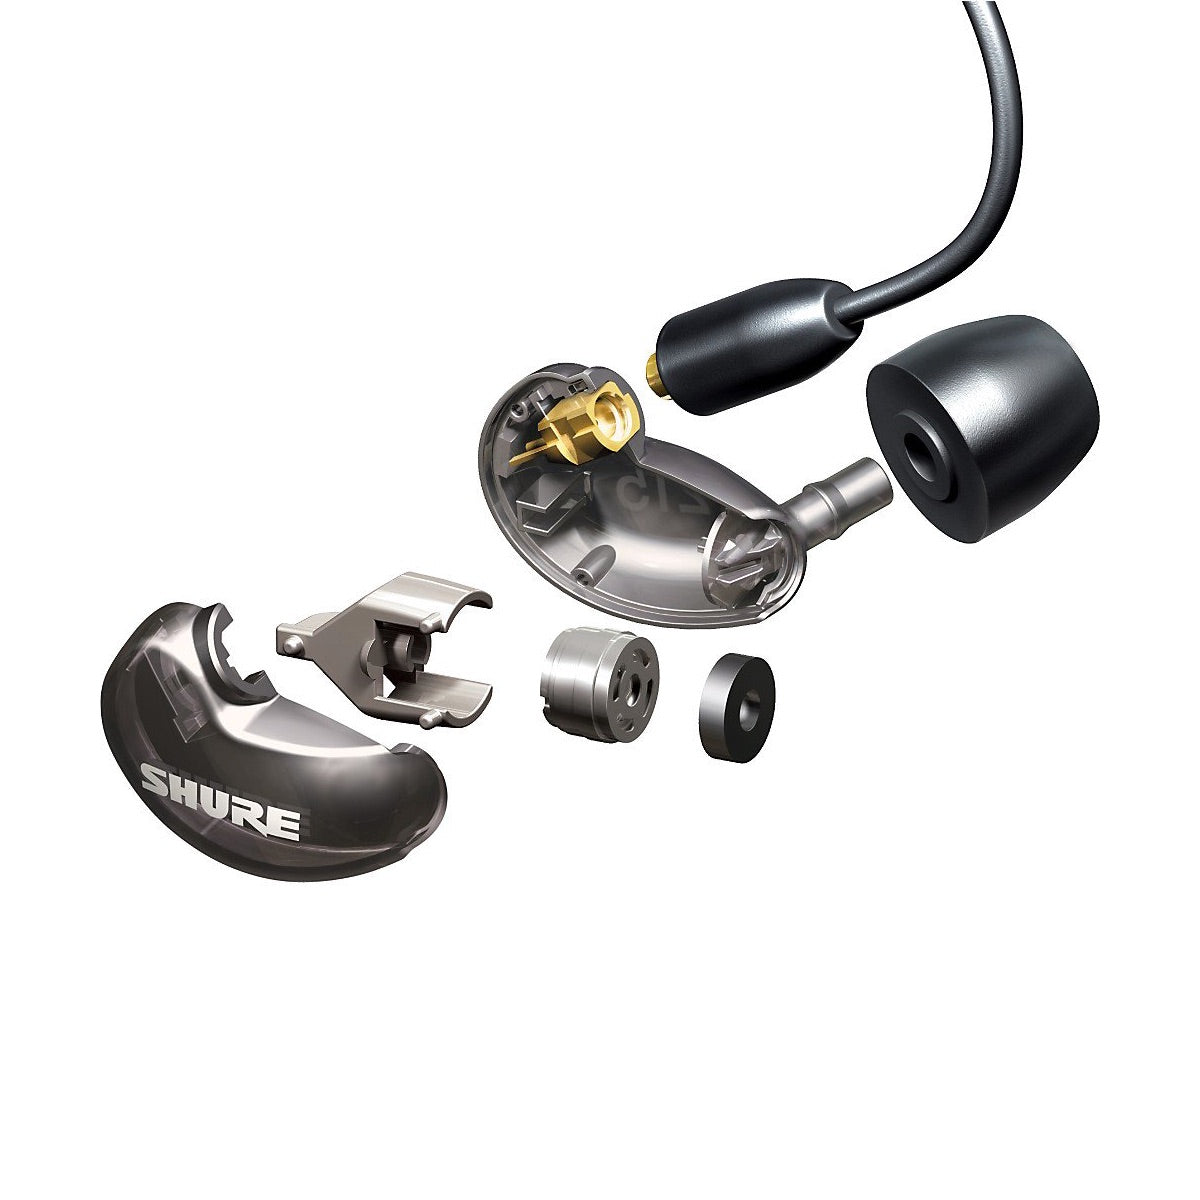 Shure SE215-K - Professional Sound Isolating Earphones, exploded view